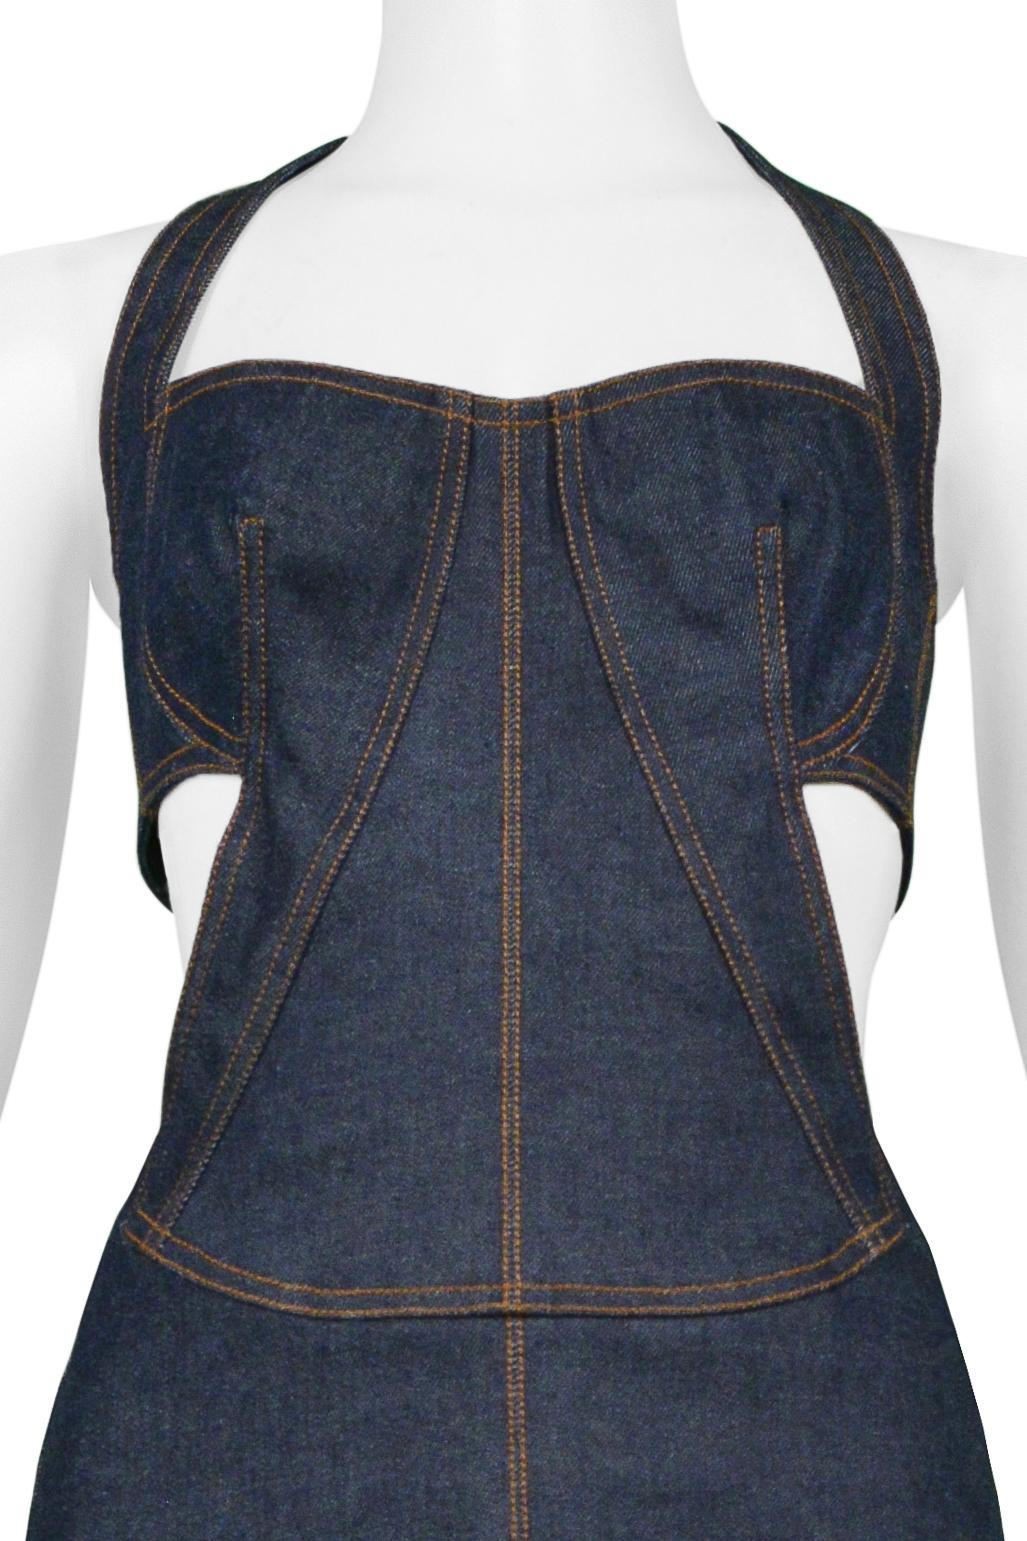 Alaia 1986 Reissued Blue Denim Cutout Dress In Excellent Condition For Sale In Los Angeles, CA